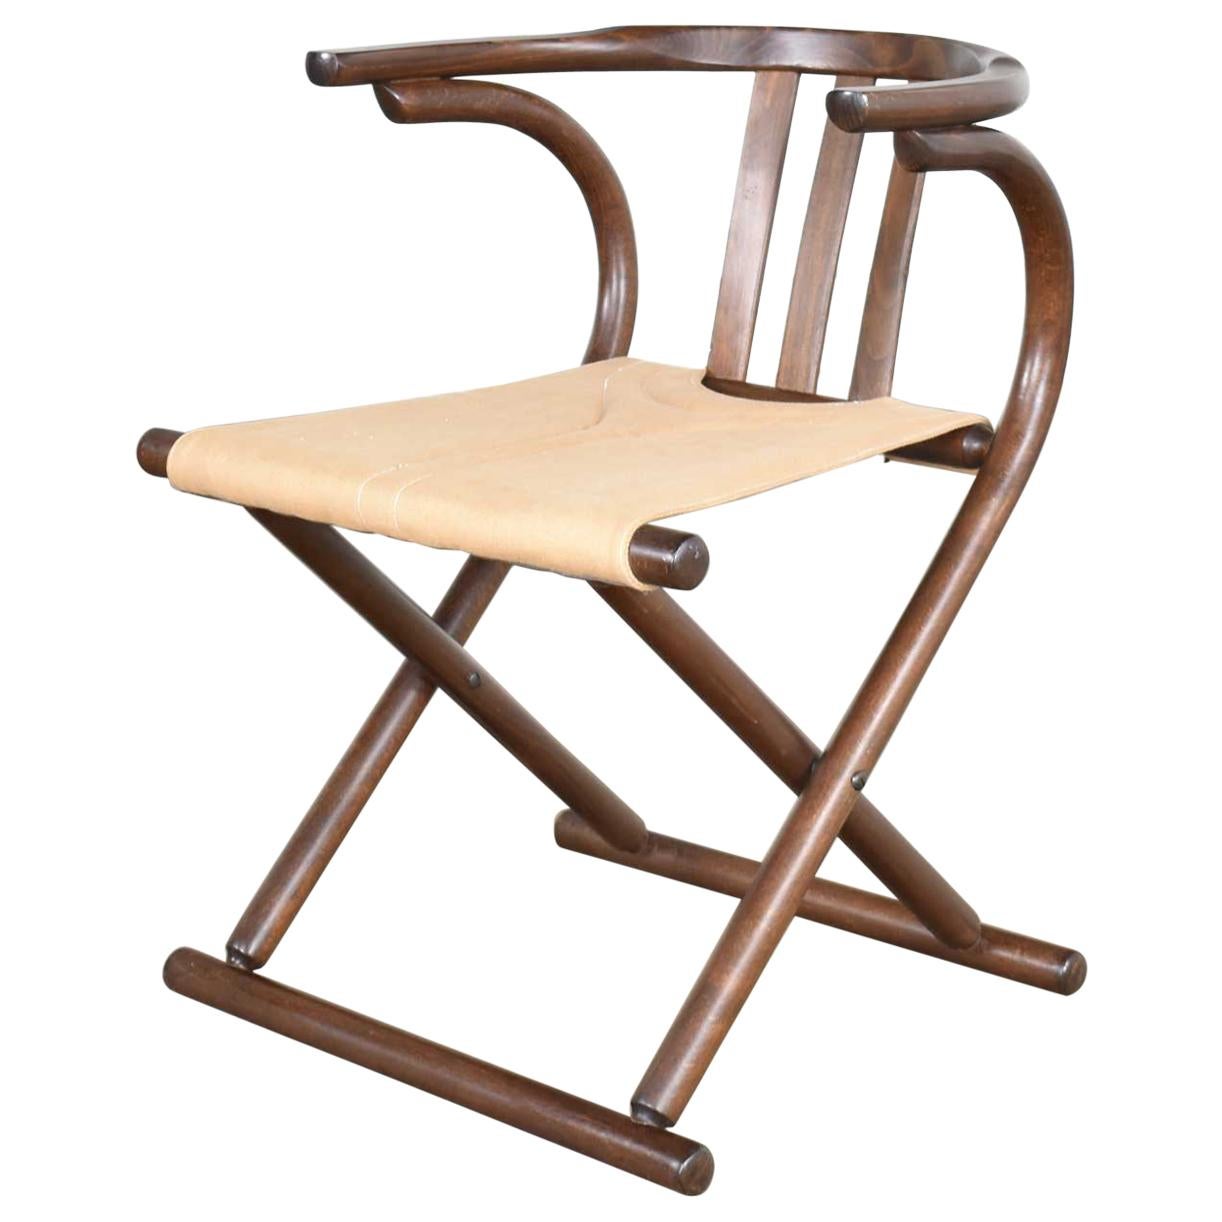 Thonet Style Bentwood Walnut Tone Folding Chair with Canvas Sling Seat, Romania